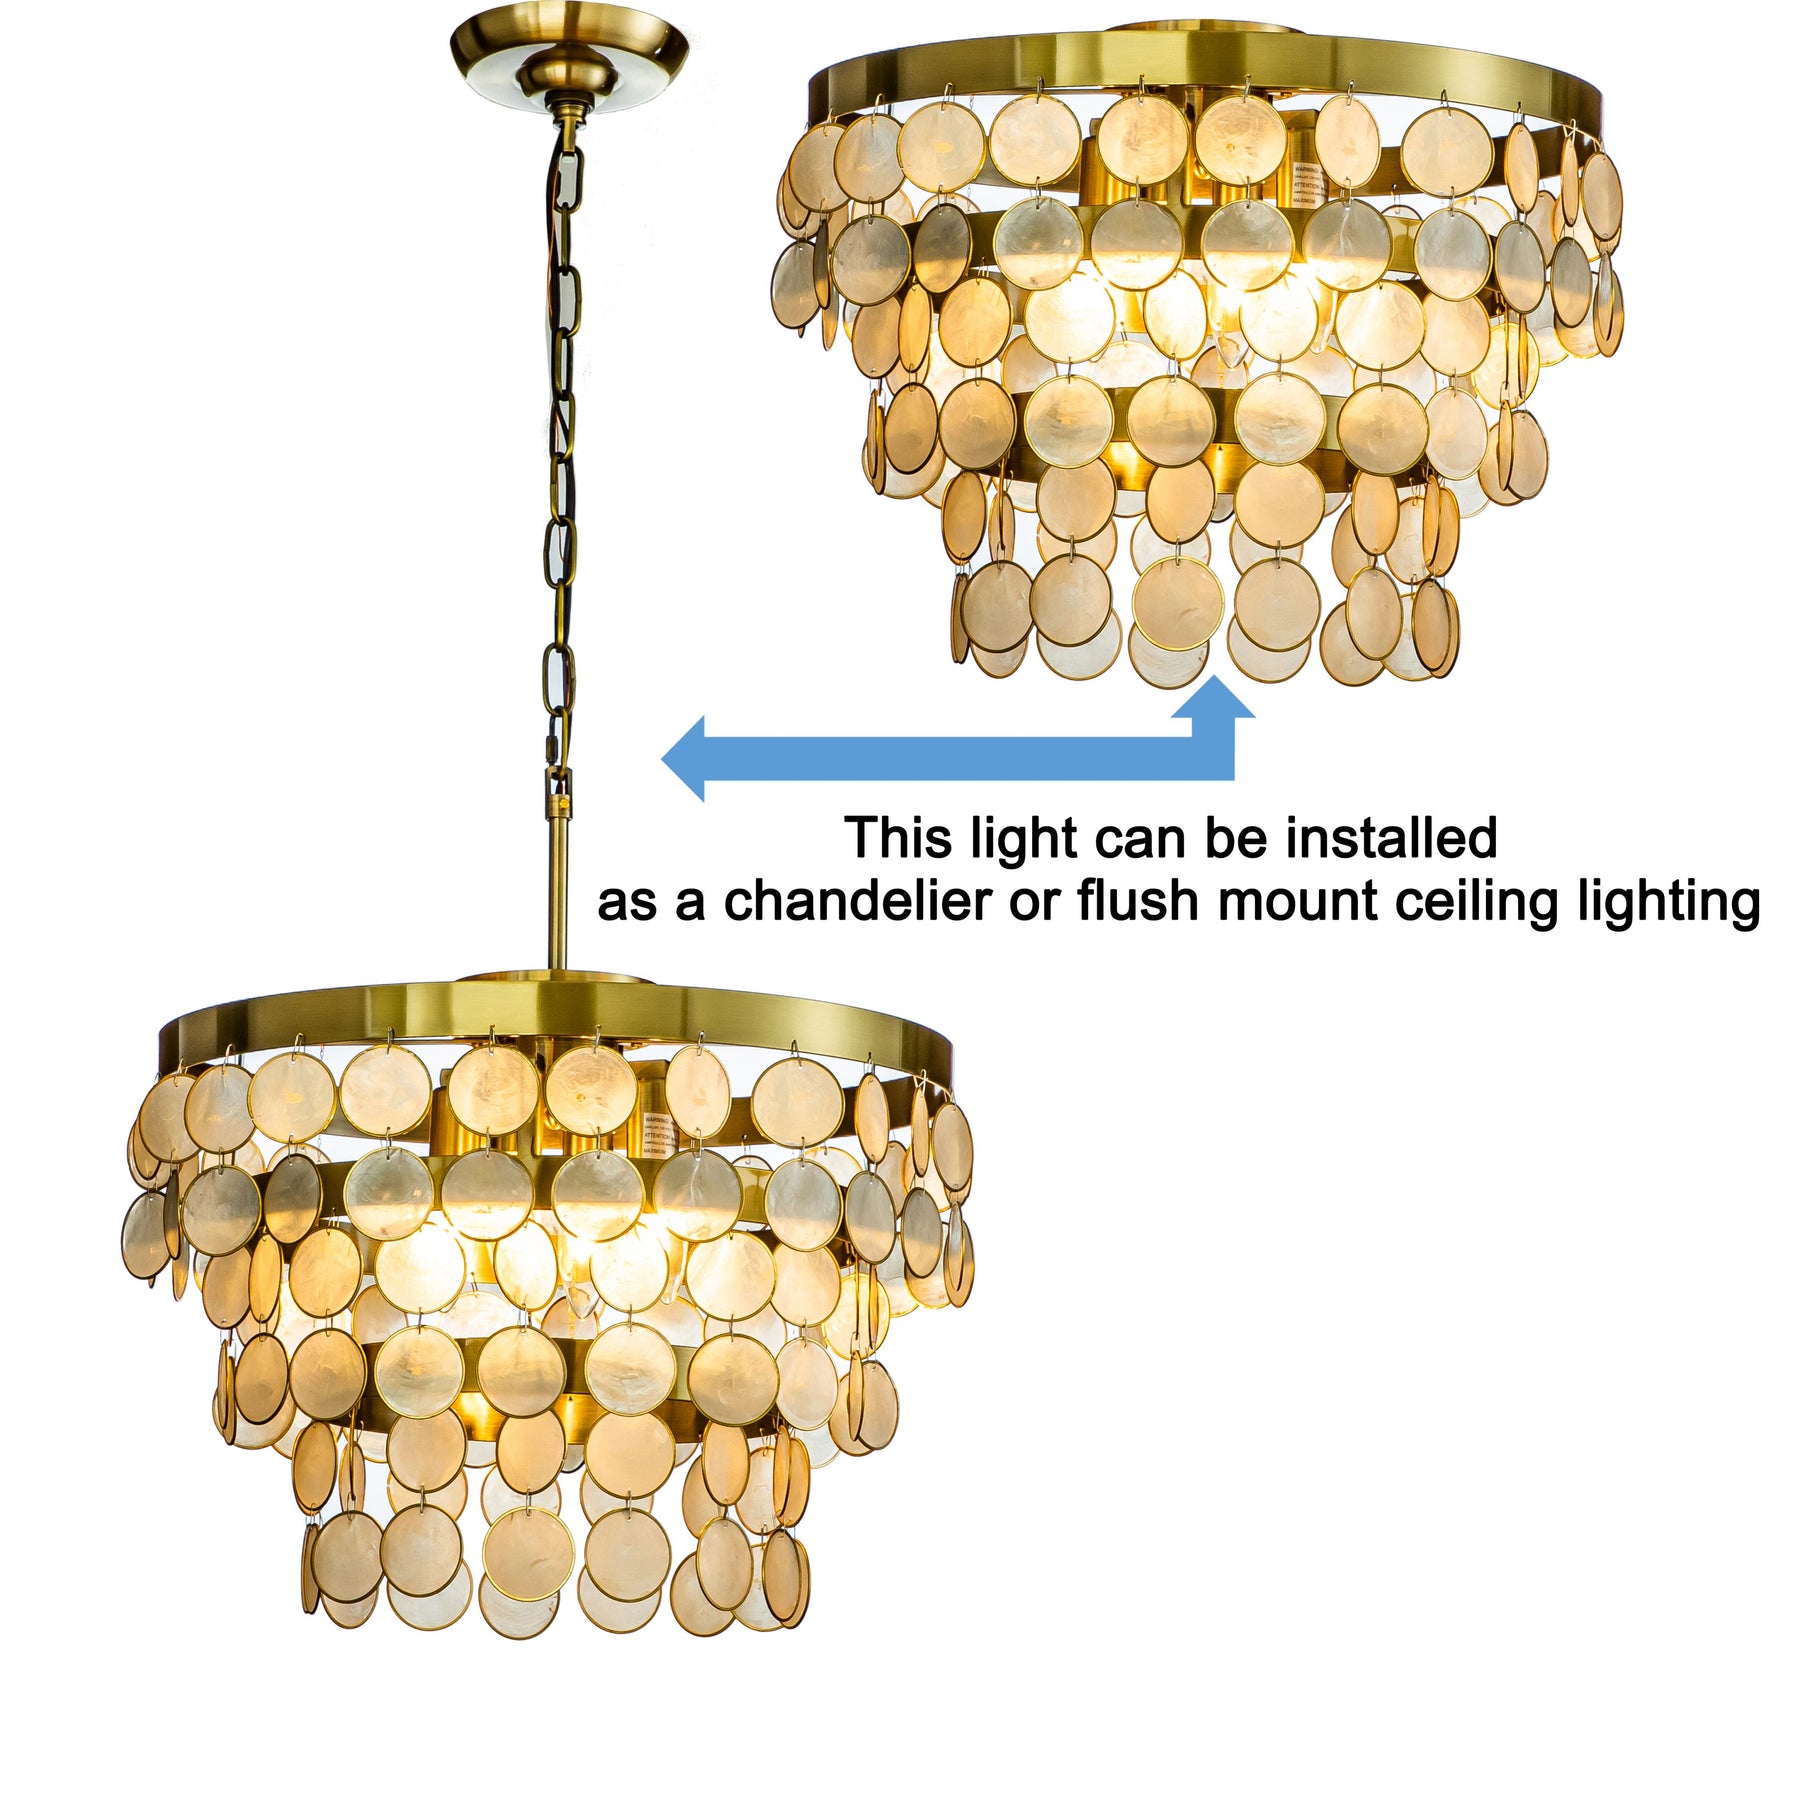 4-Light Round Coastal Capiz Shells Tiered Chandelier With Antique Gold Metal And Natural Seashell